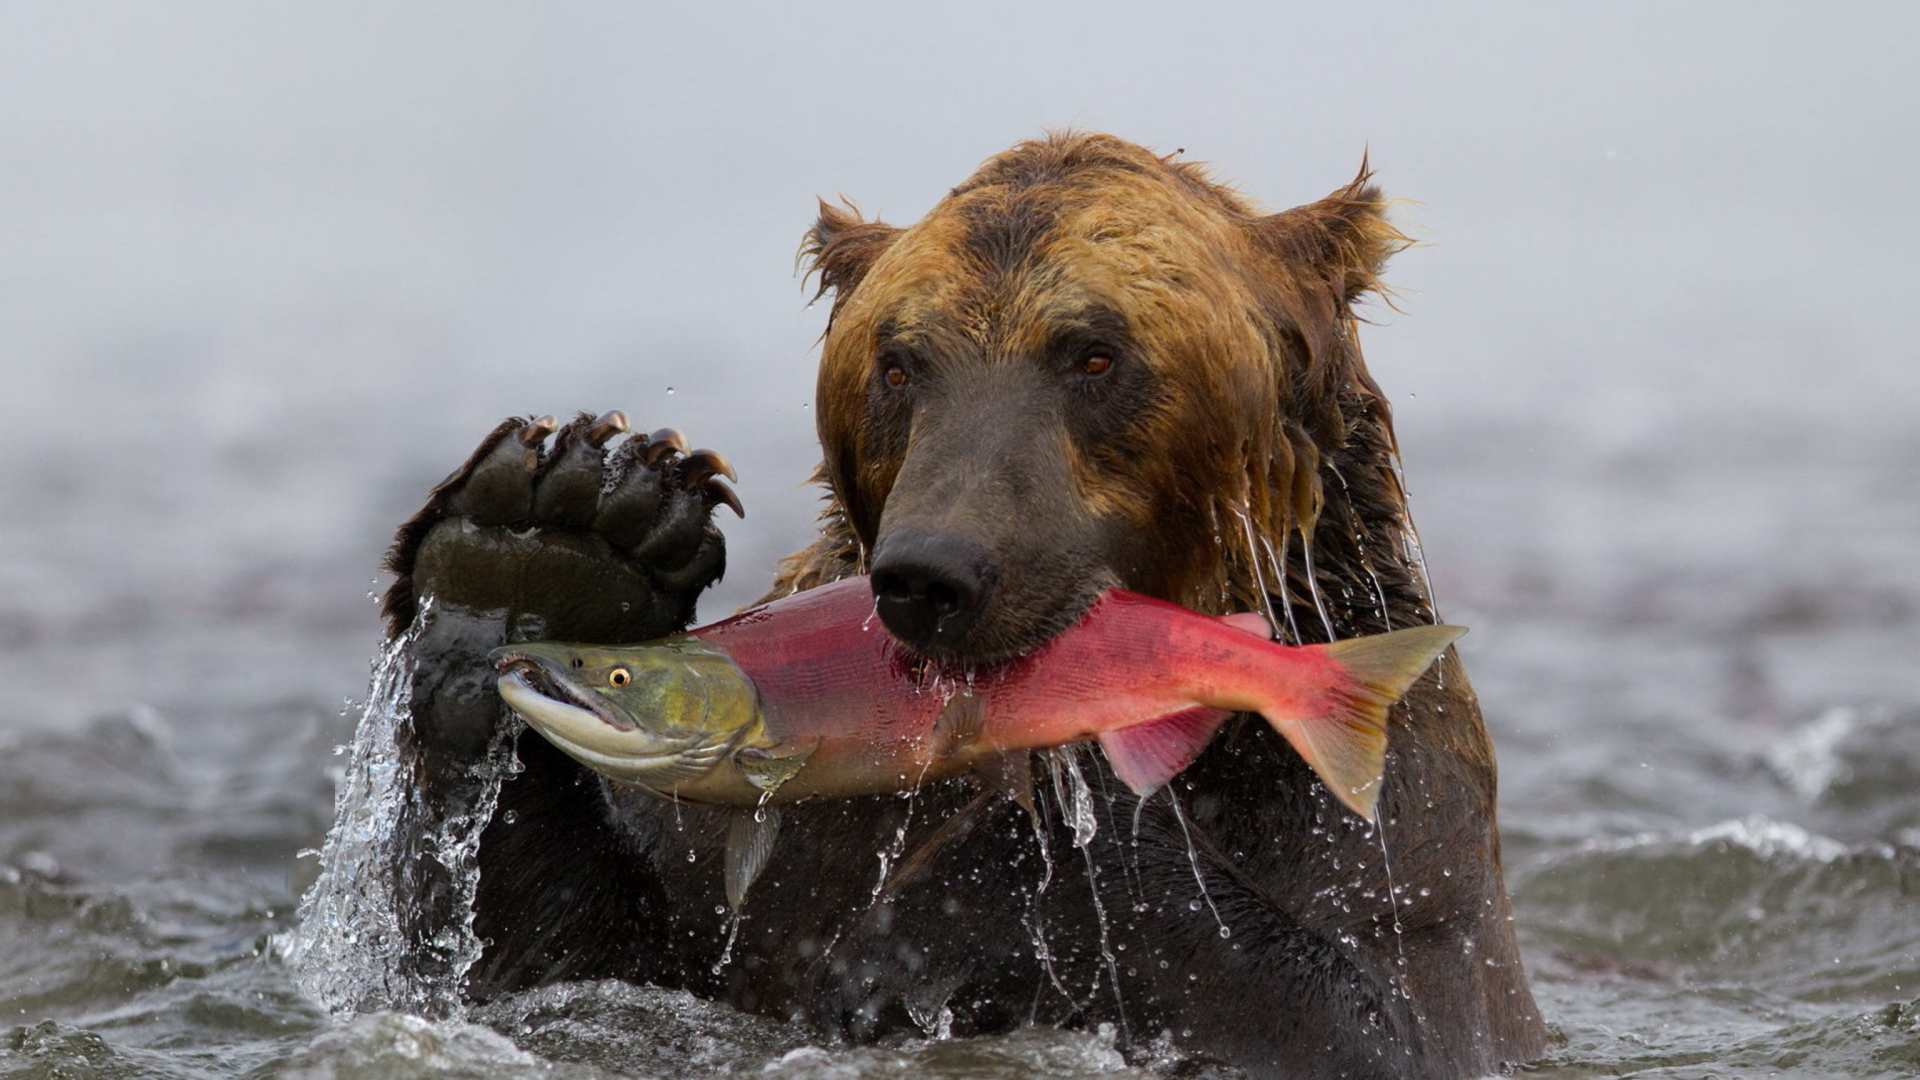 Grizzly Bear Catching Fish wallpaper 1920x1080